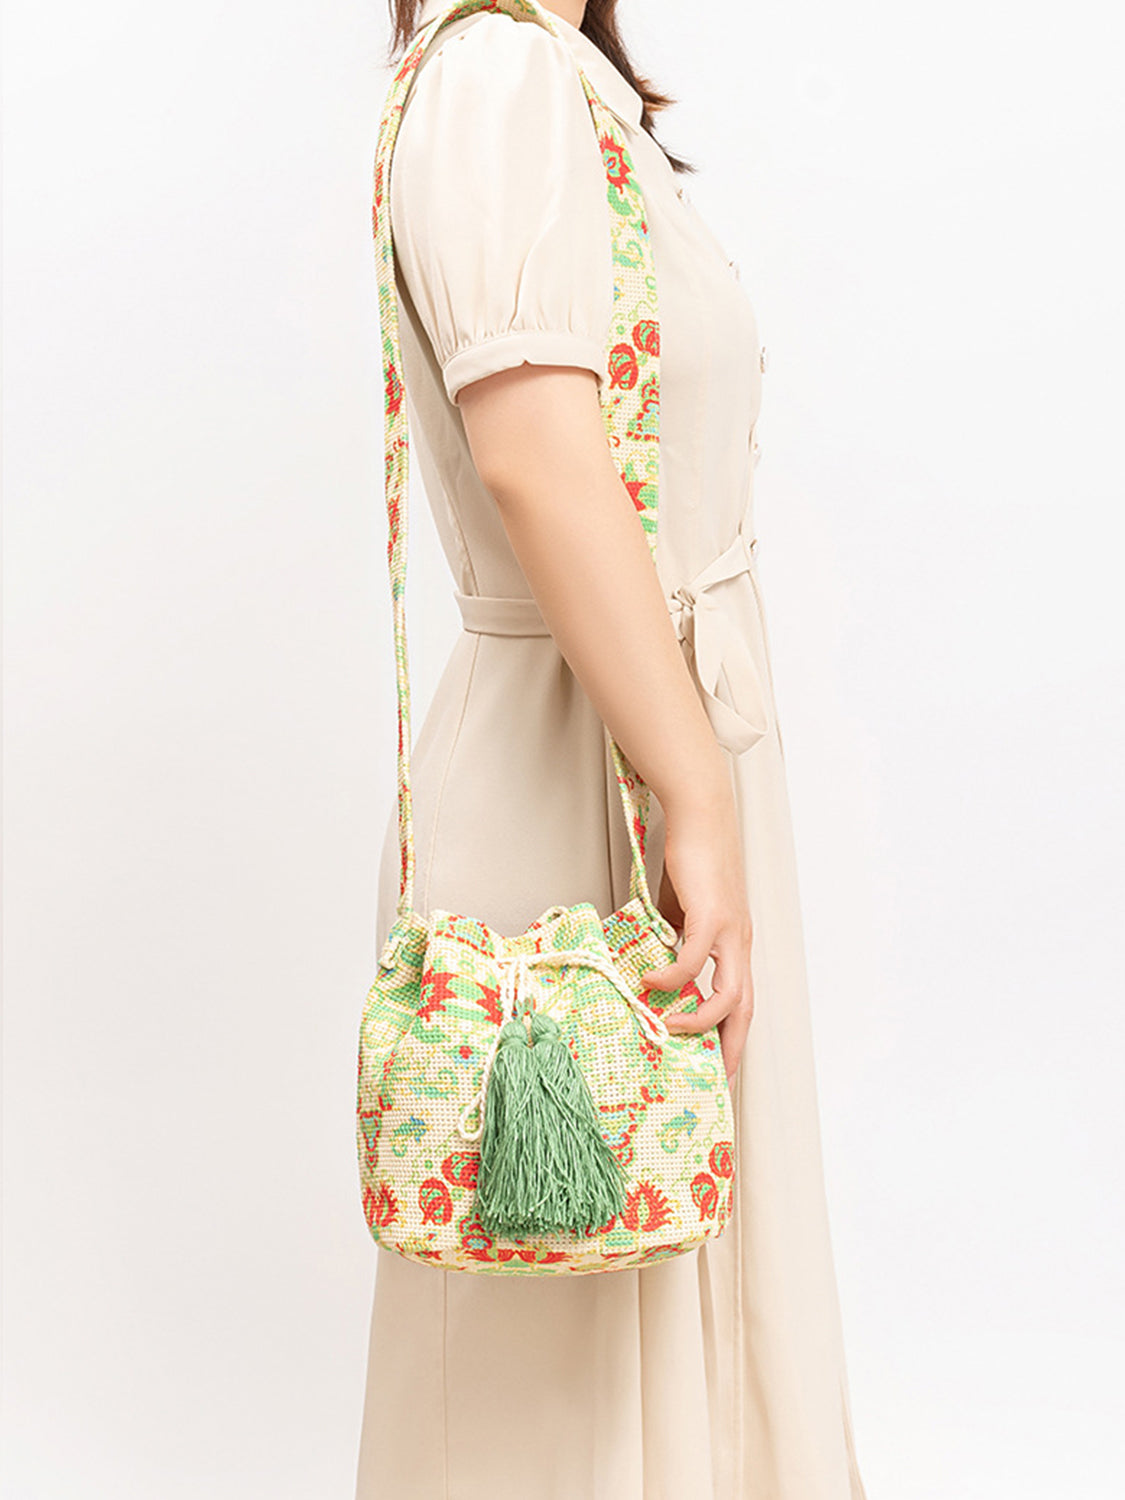 Floral patterned bucket bag with green tassels.